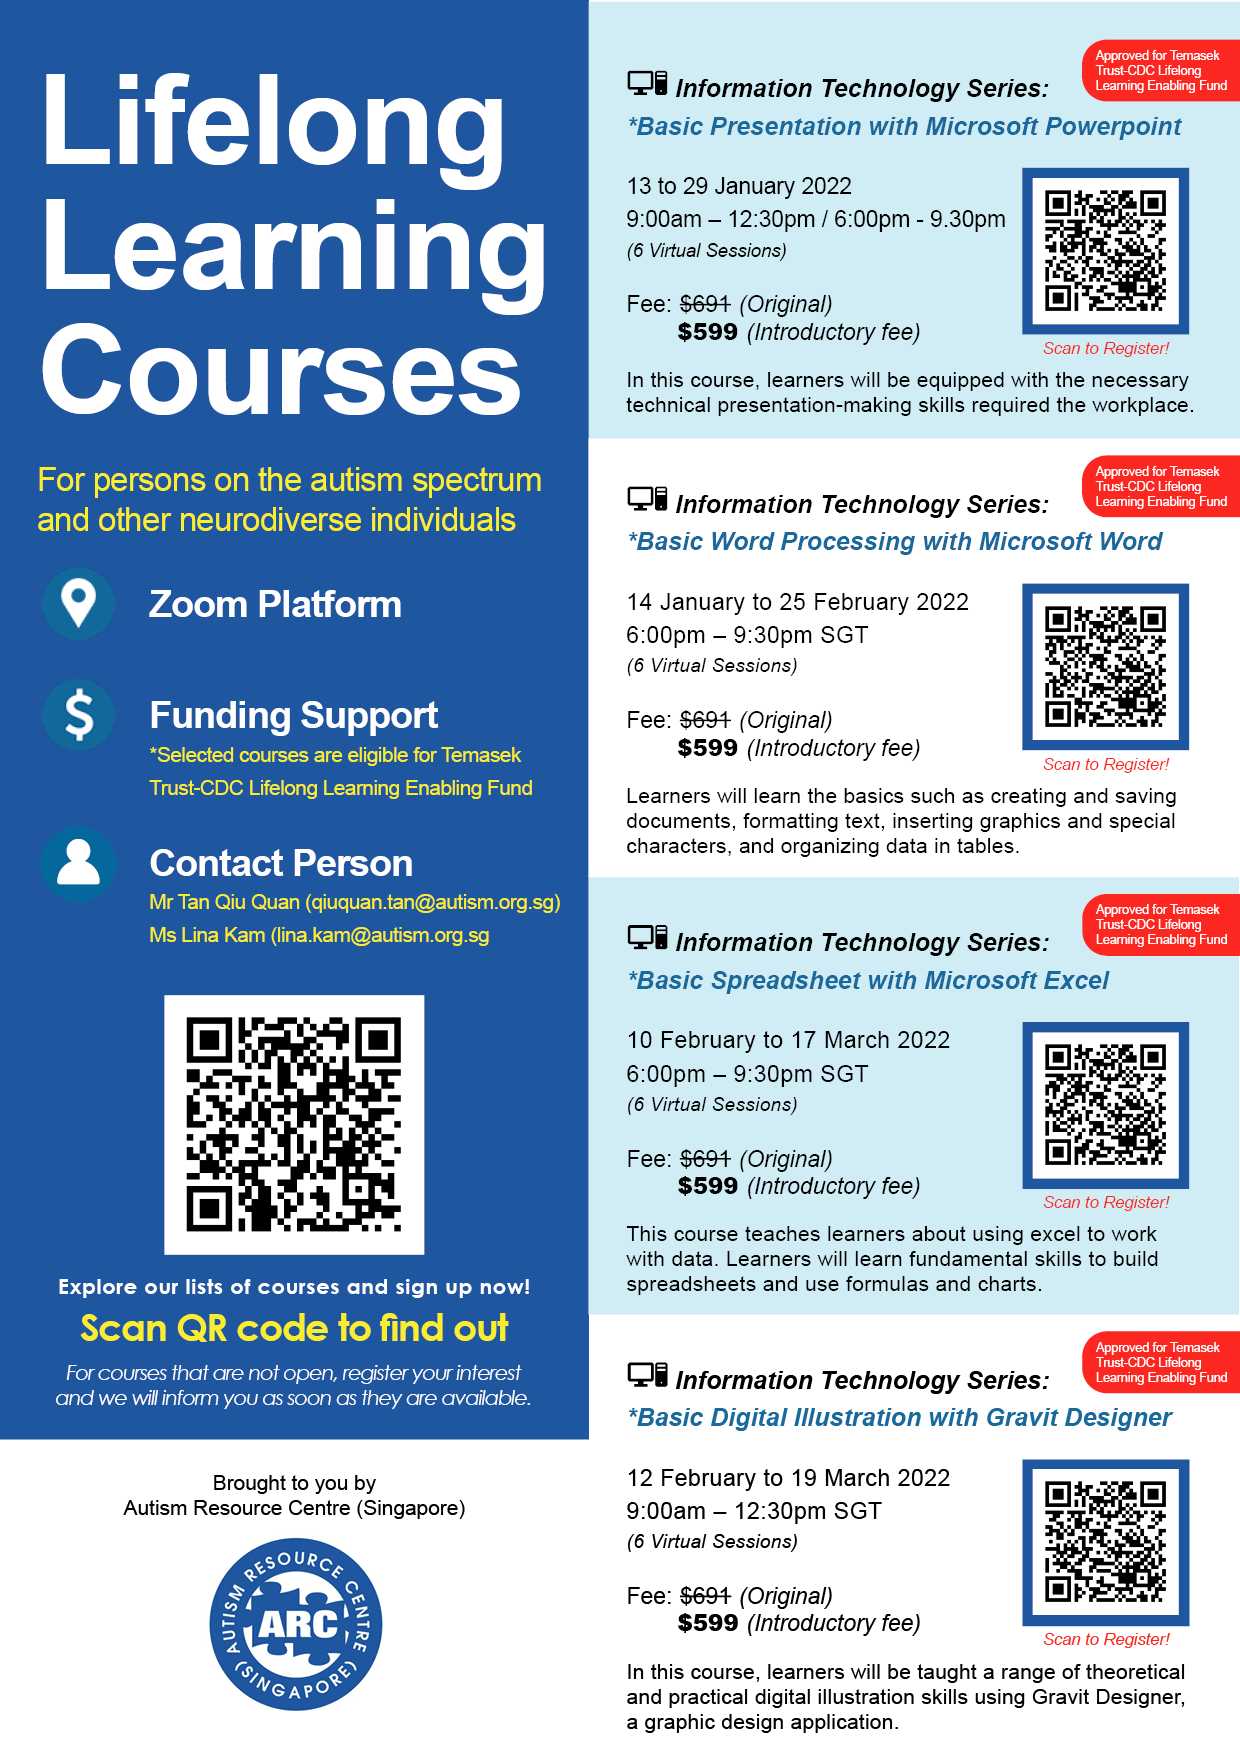 Lifelong Learning Courses For Persons On The Autism Spectrum (Information Technology Series)